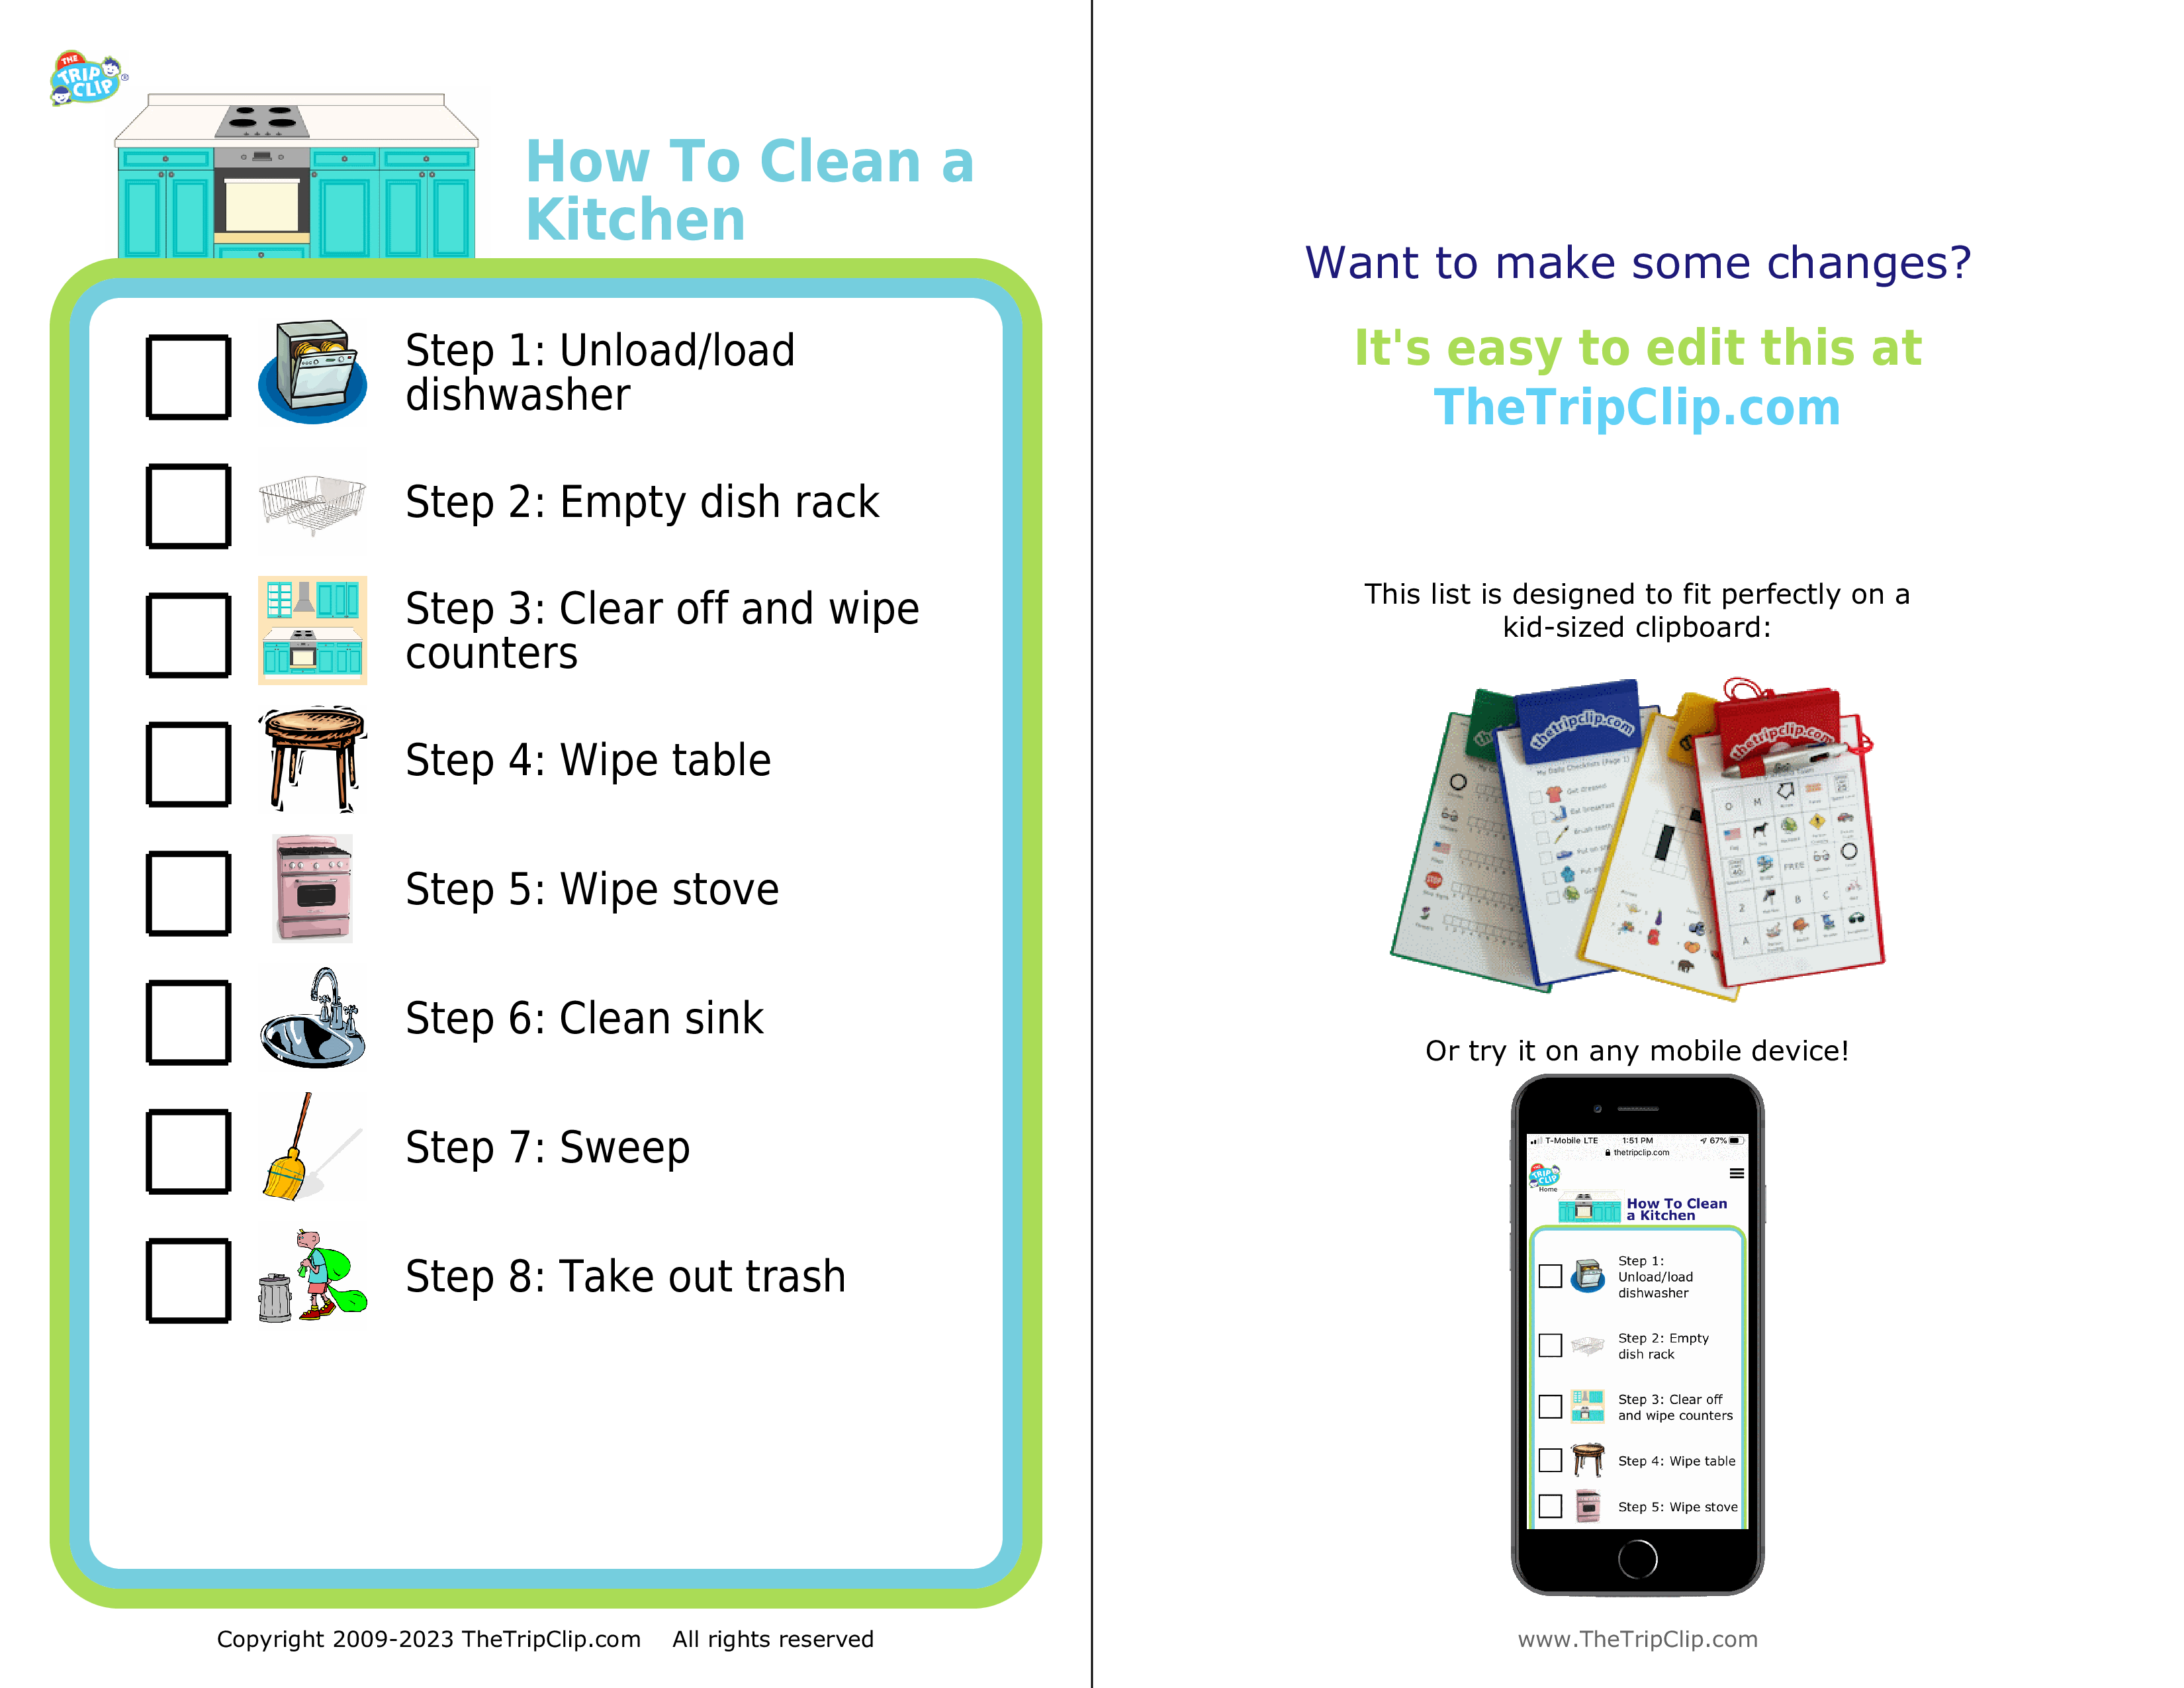 Picture checklists to teach a kid to clean a kitchen in 8 steps